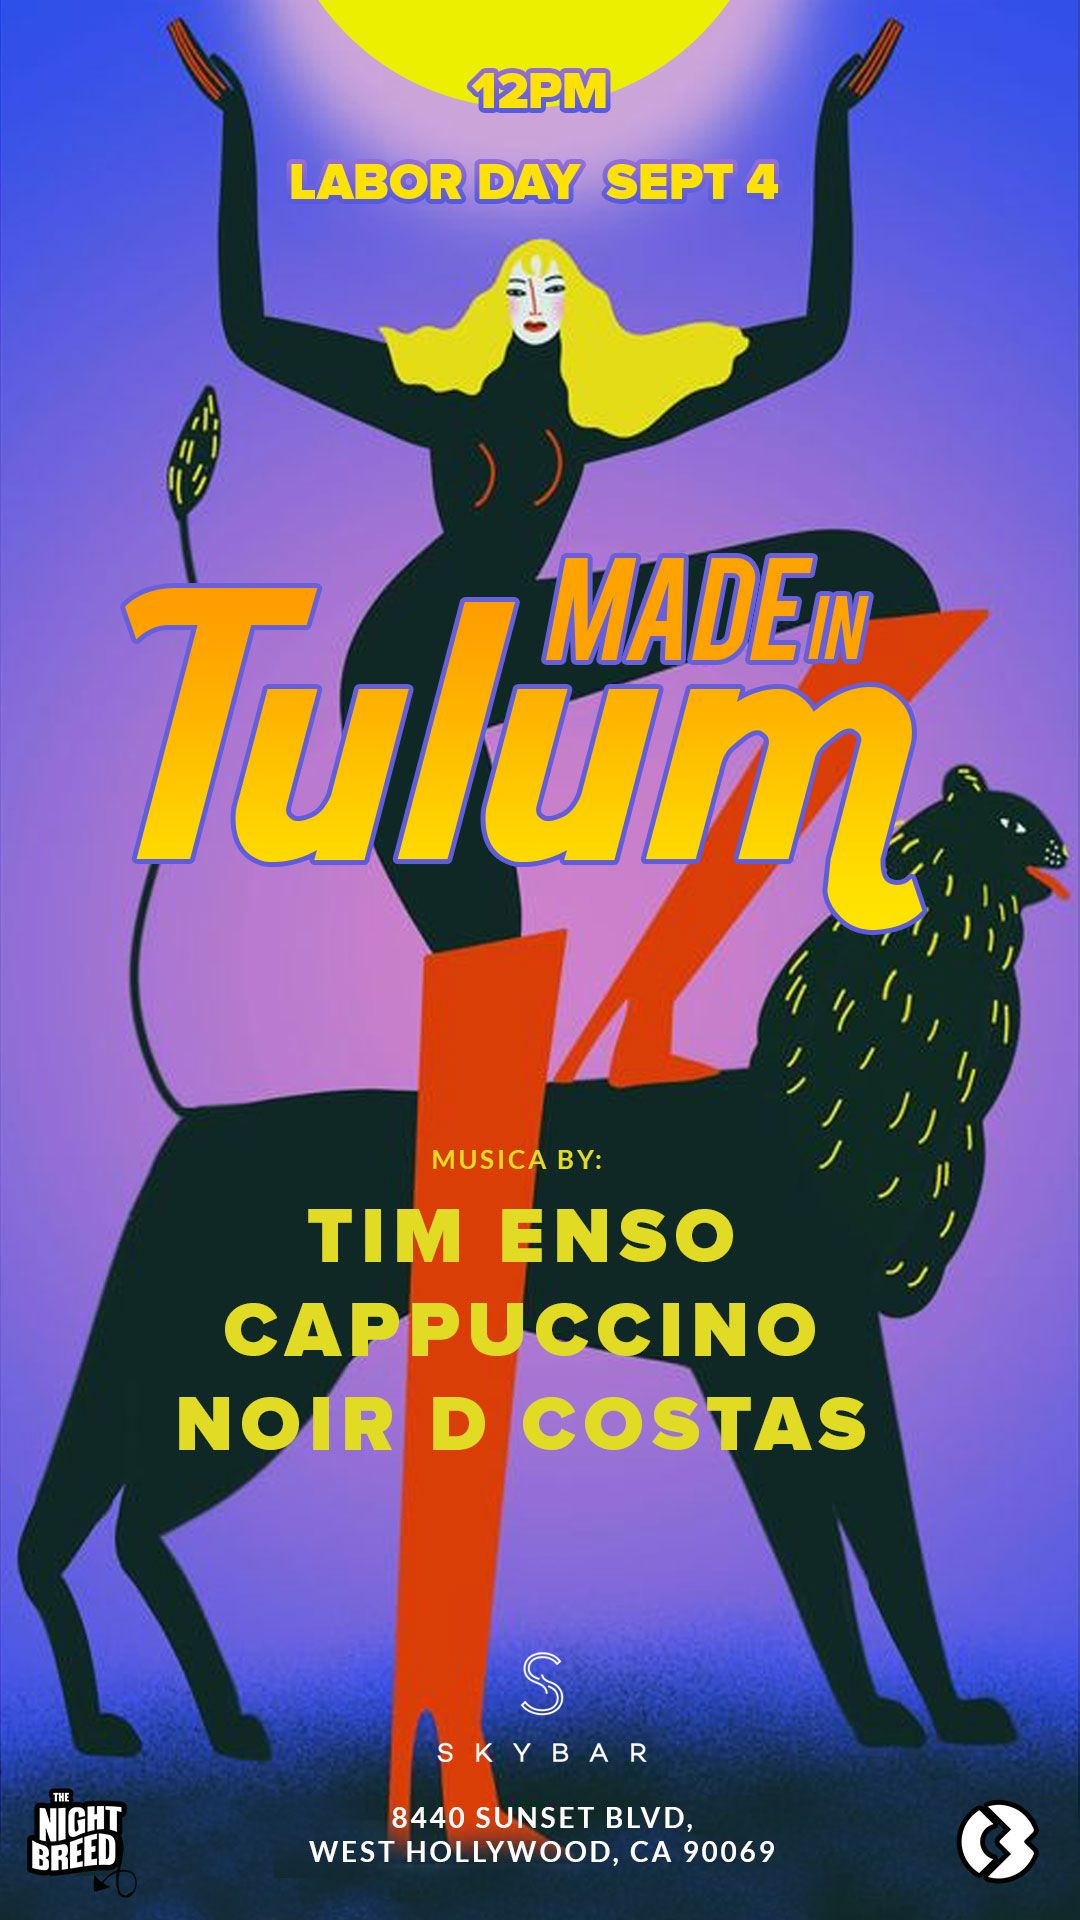 An image of the Made in Tulum Pool Party flyer at Skybar.